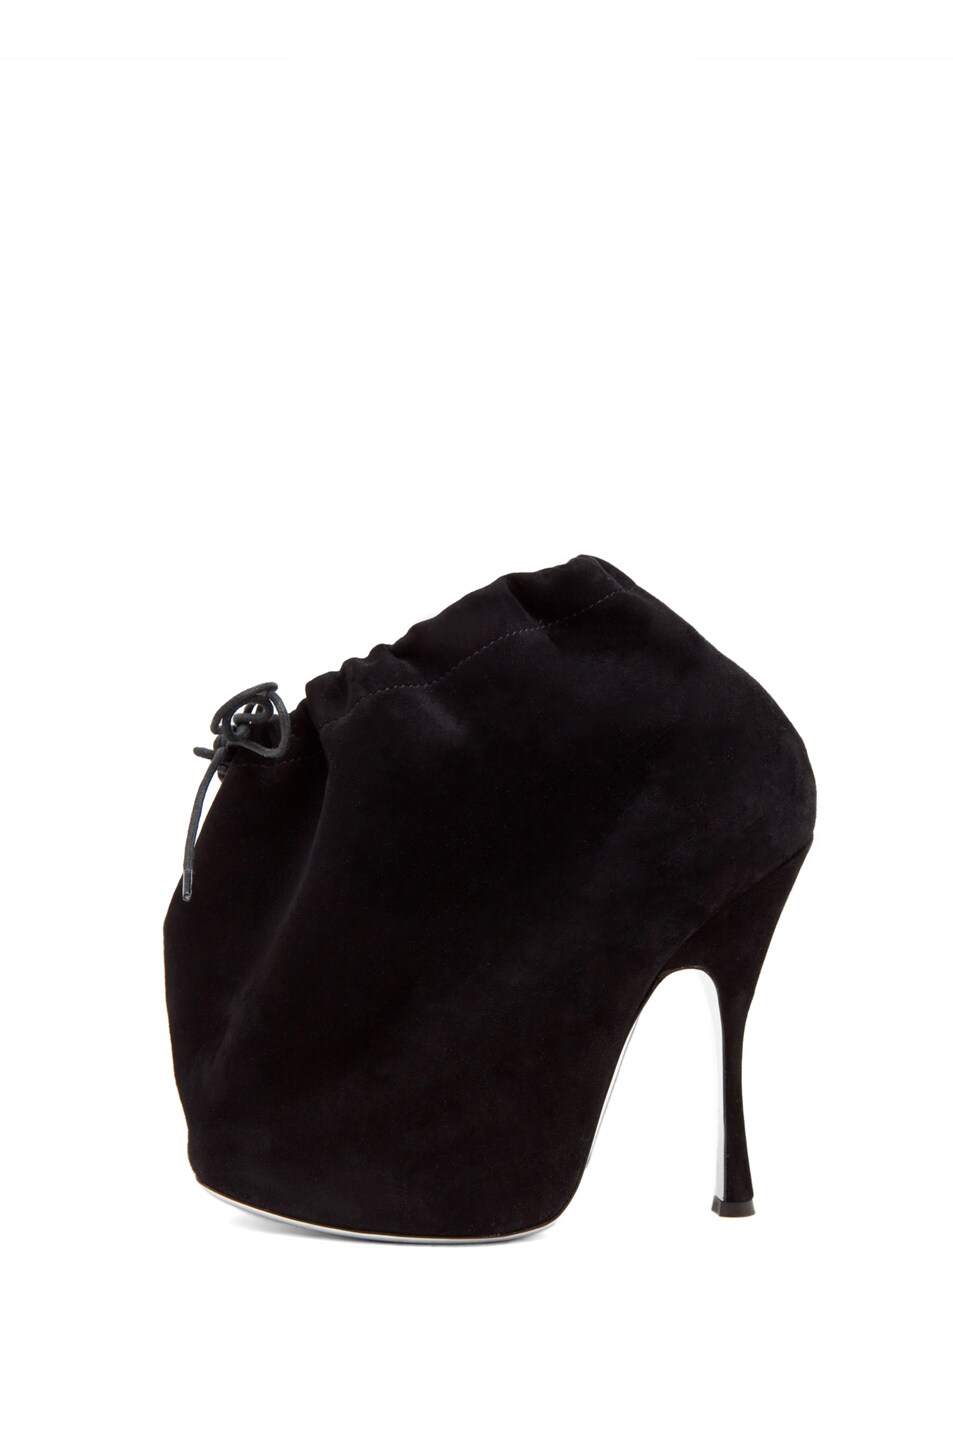 Image 1 of Vivienne Westwood Red Label Skyscraper Bag Boot in Buttero Black